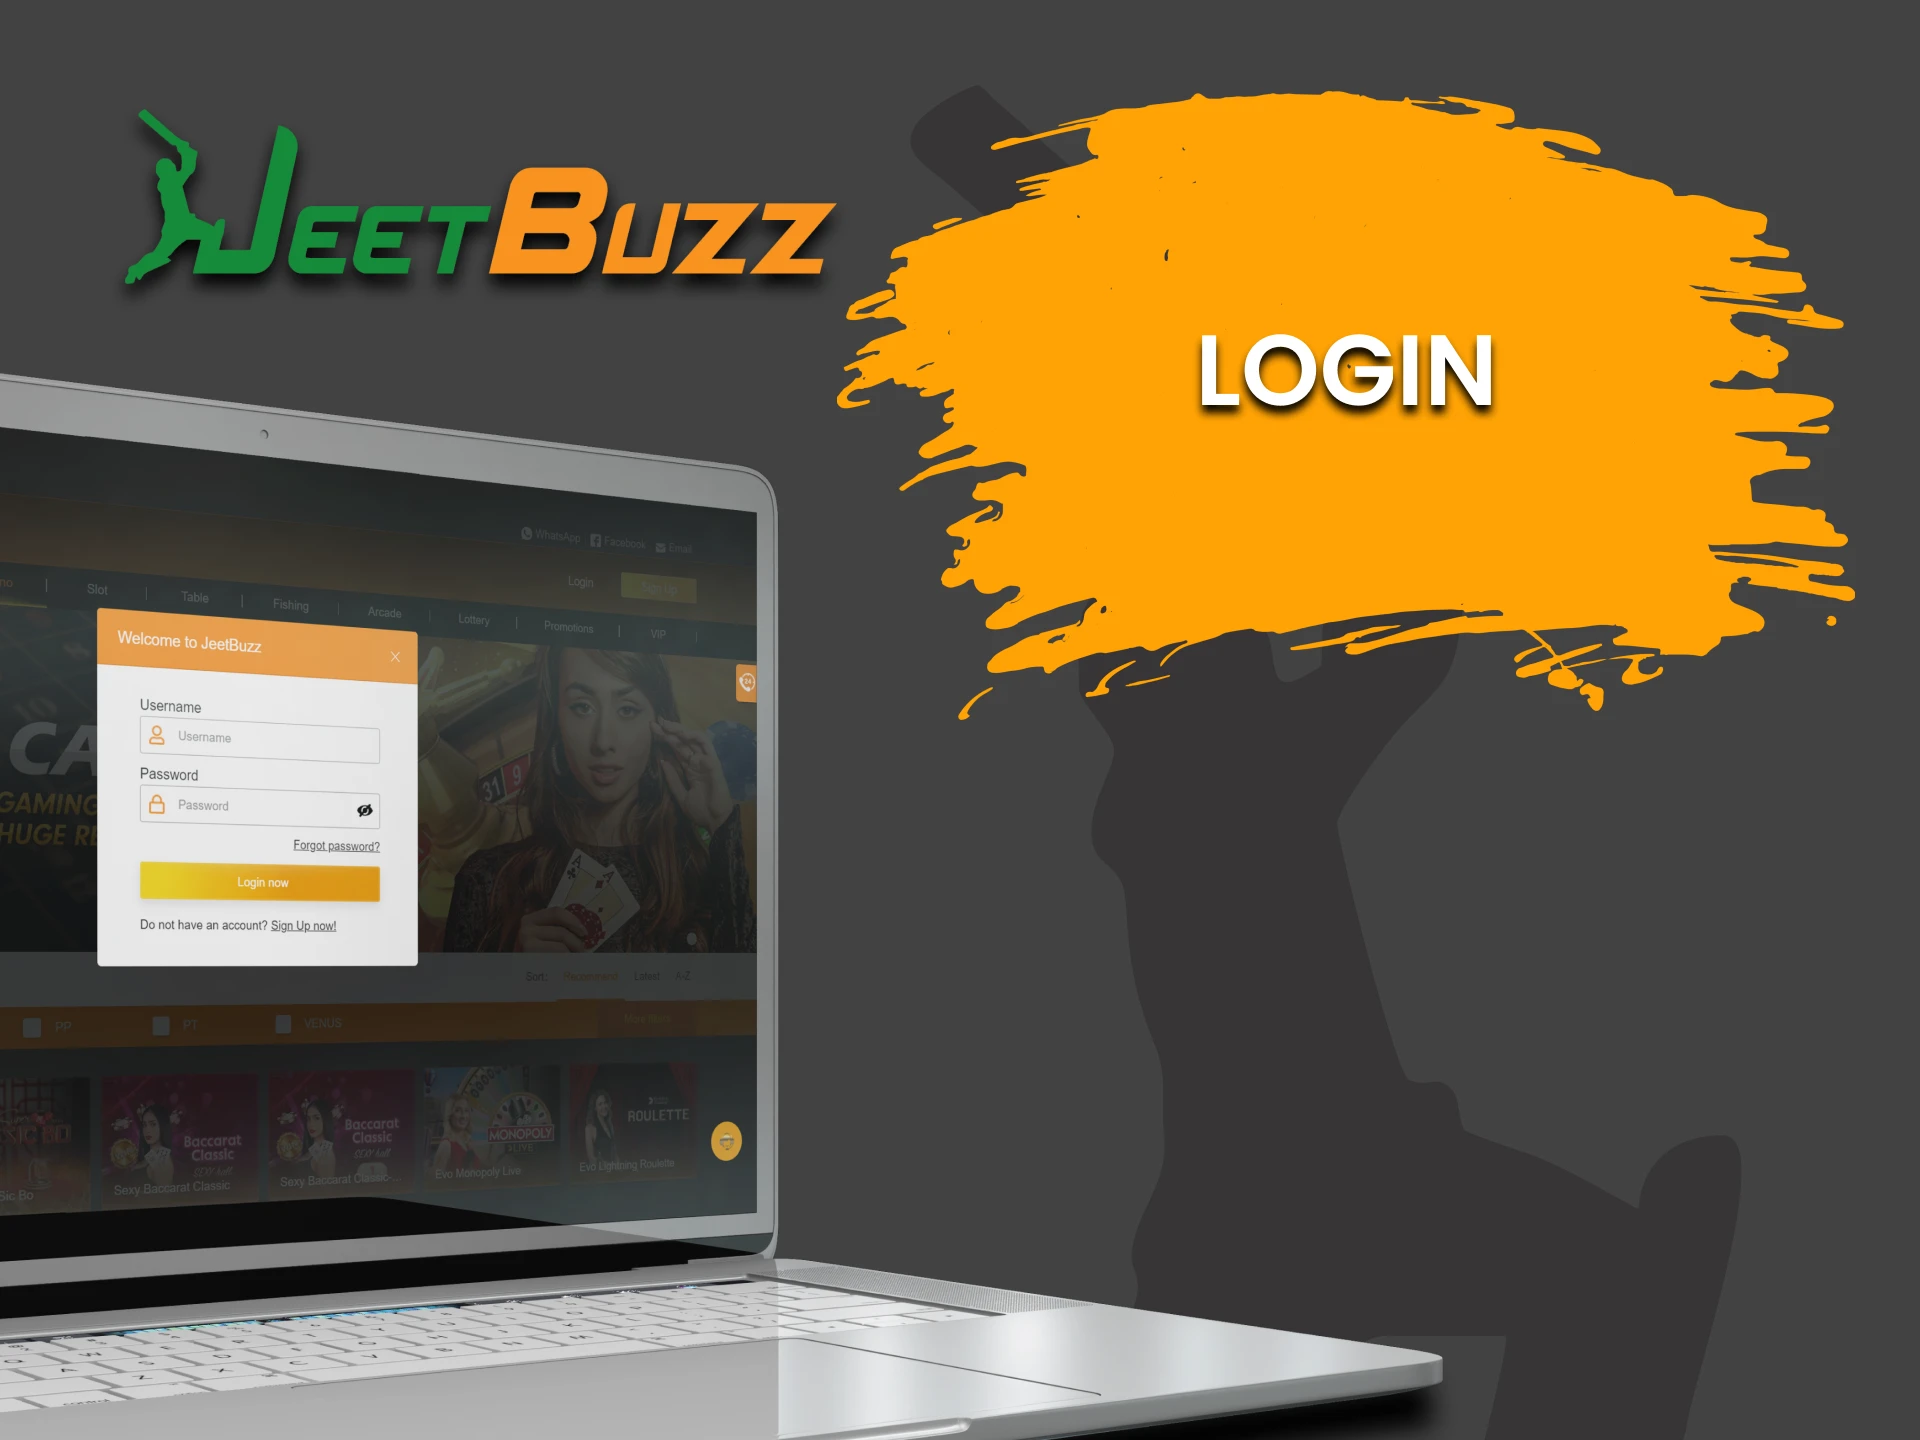 Sign in to your personal JeetBuzz account.